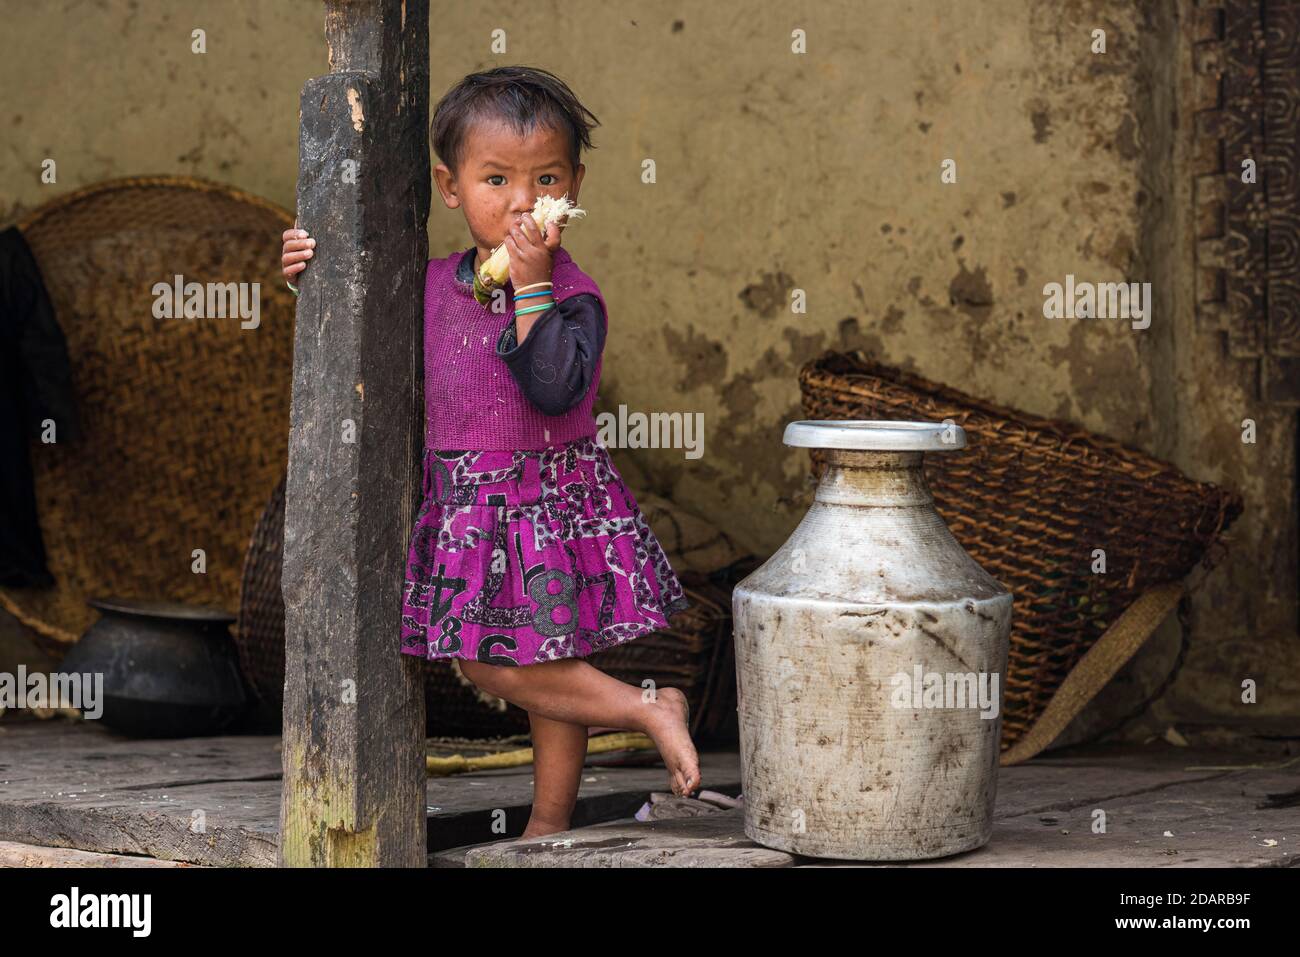 A little girl stands in front of the house next to an aluminium water container and chews sugar cane, Manaslu region, Himalaya, Nepal Stock Photo